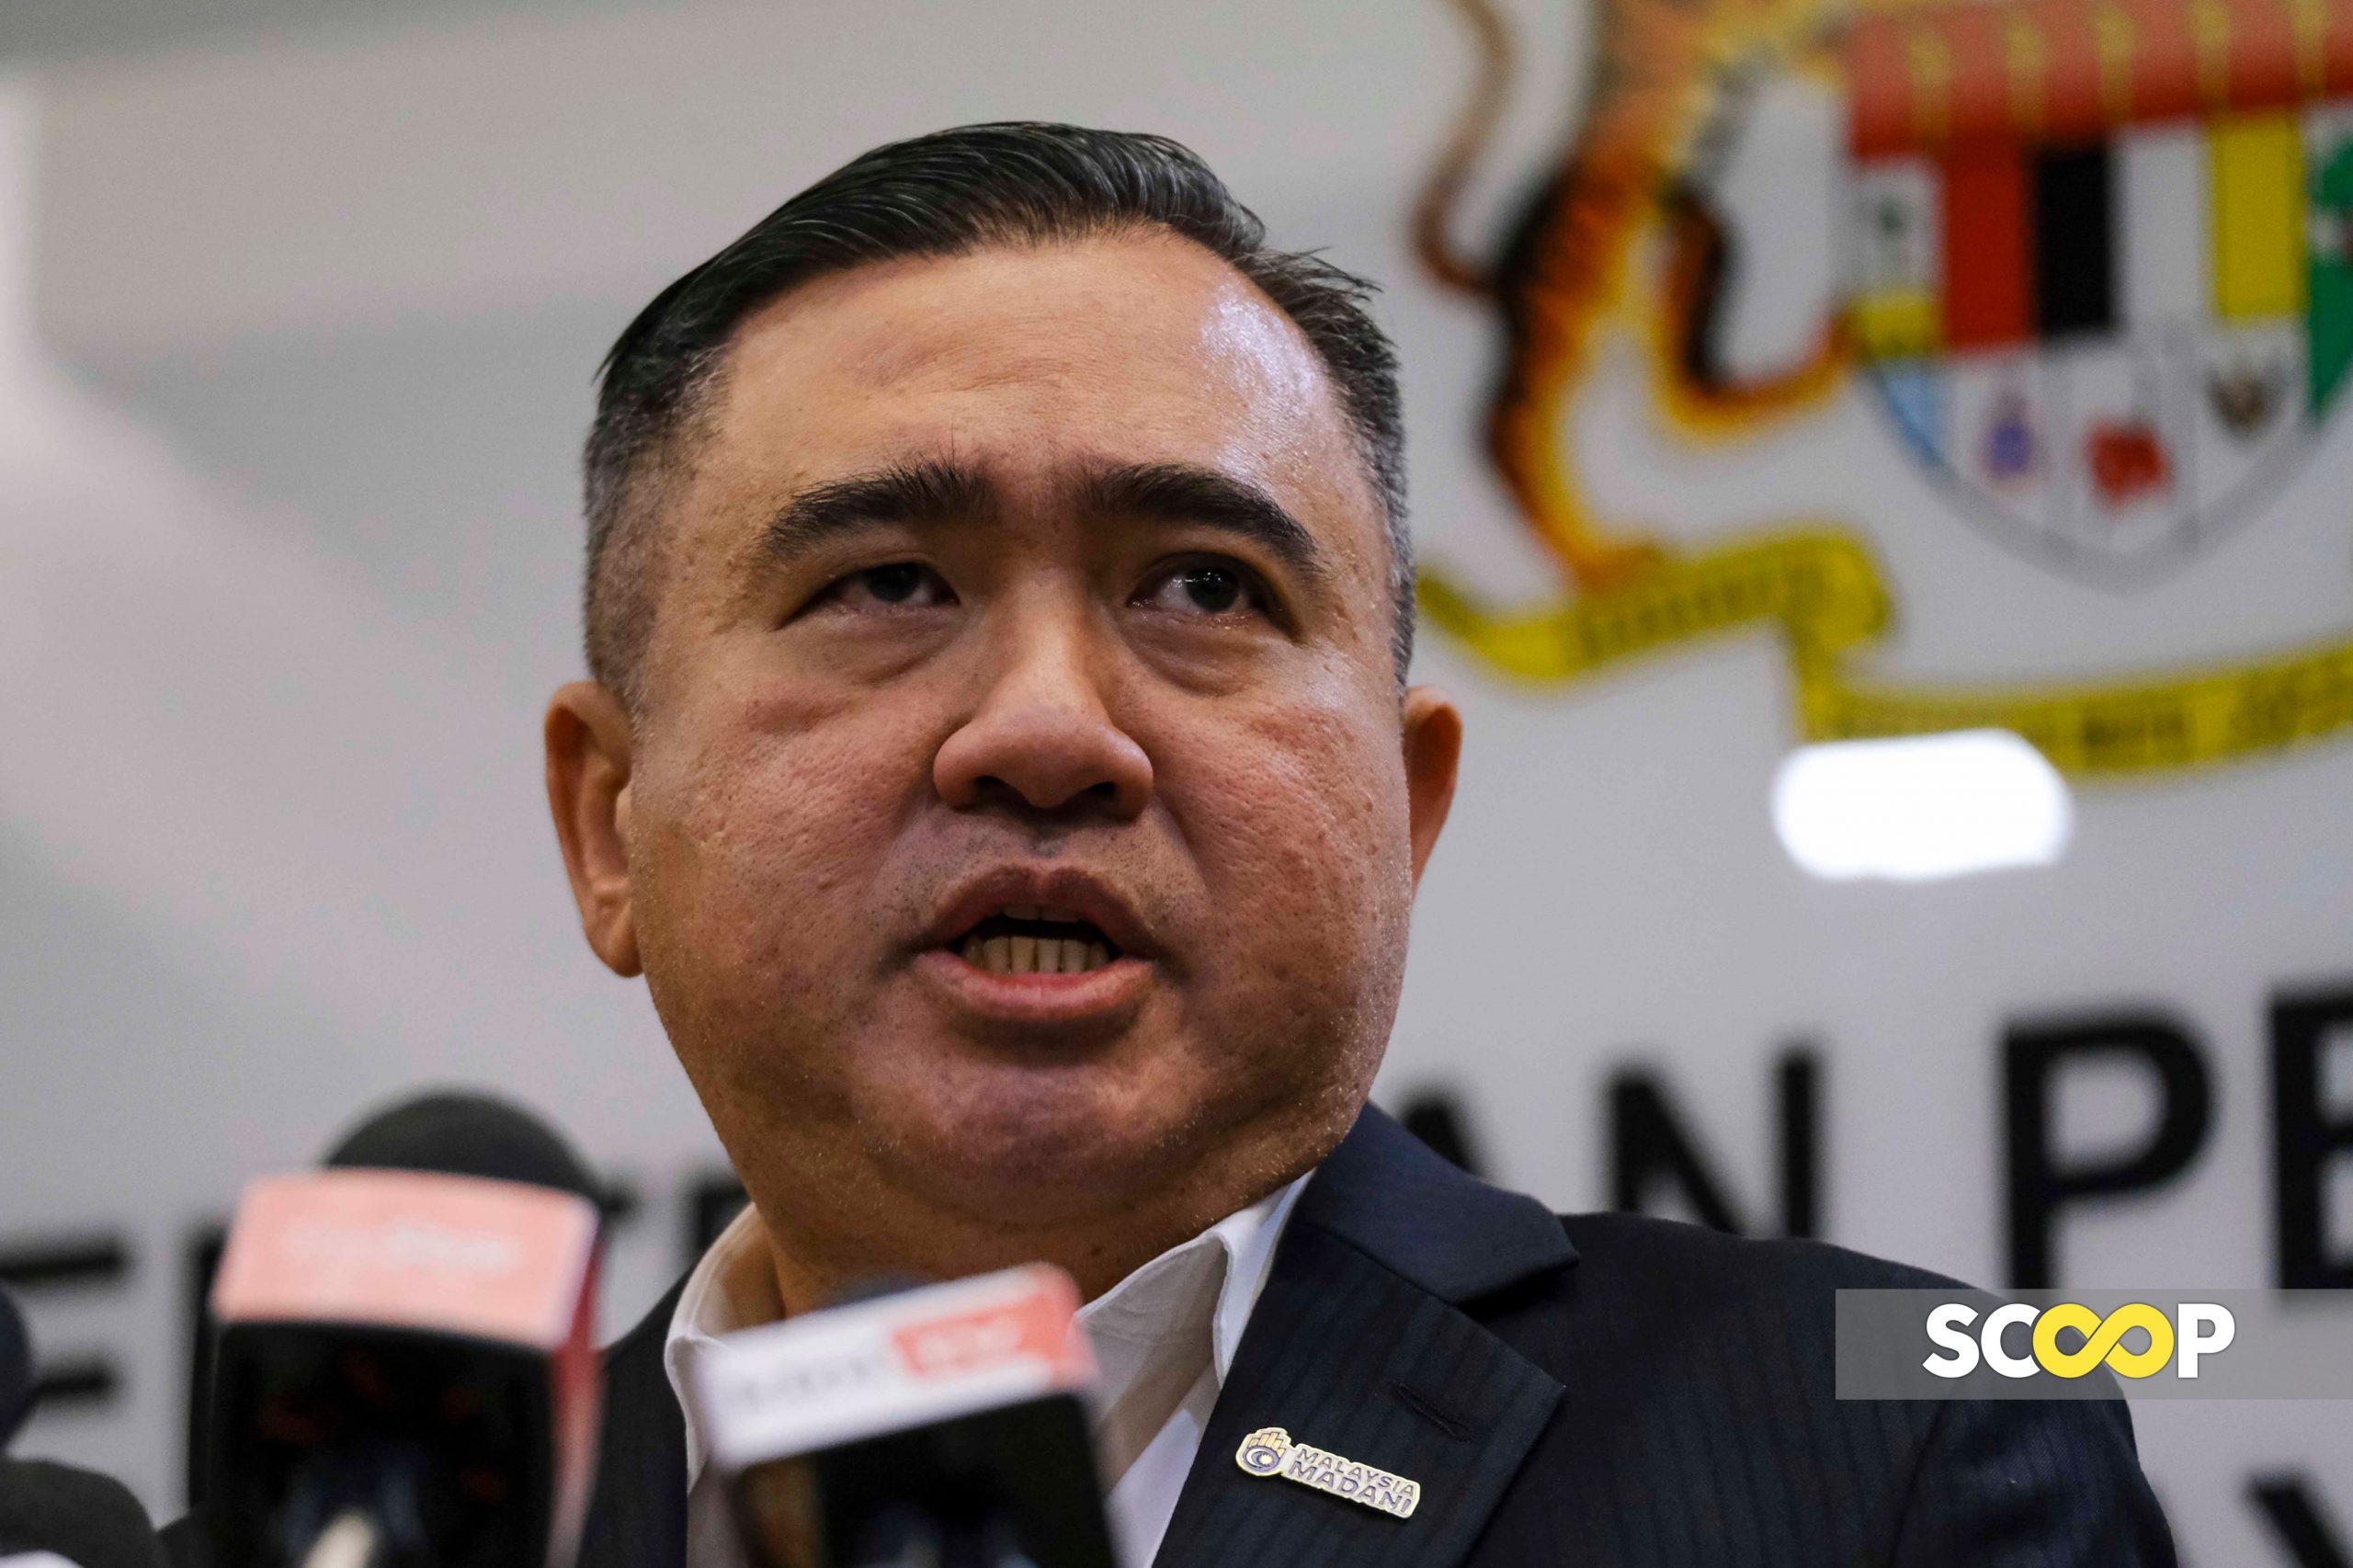 Cabinet reshuffle: Loke to address changes during press conference later today